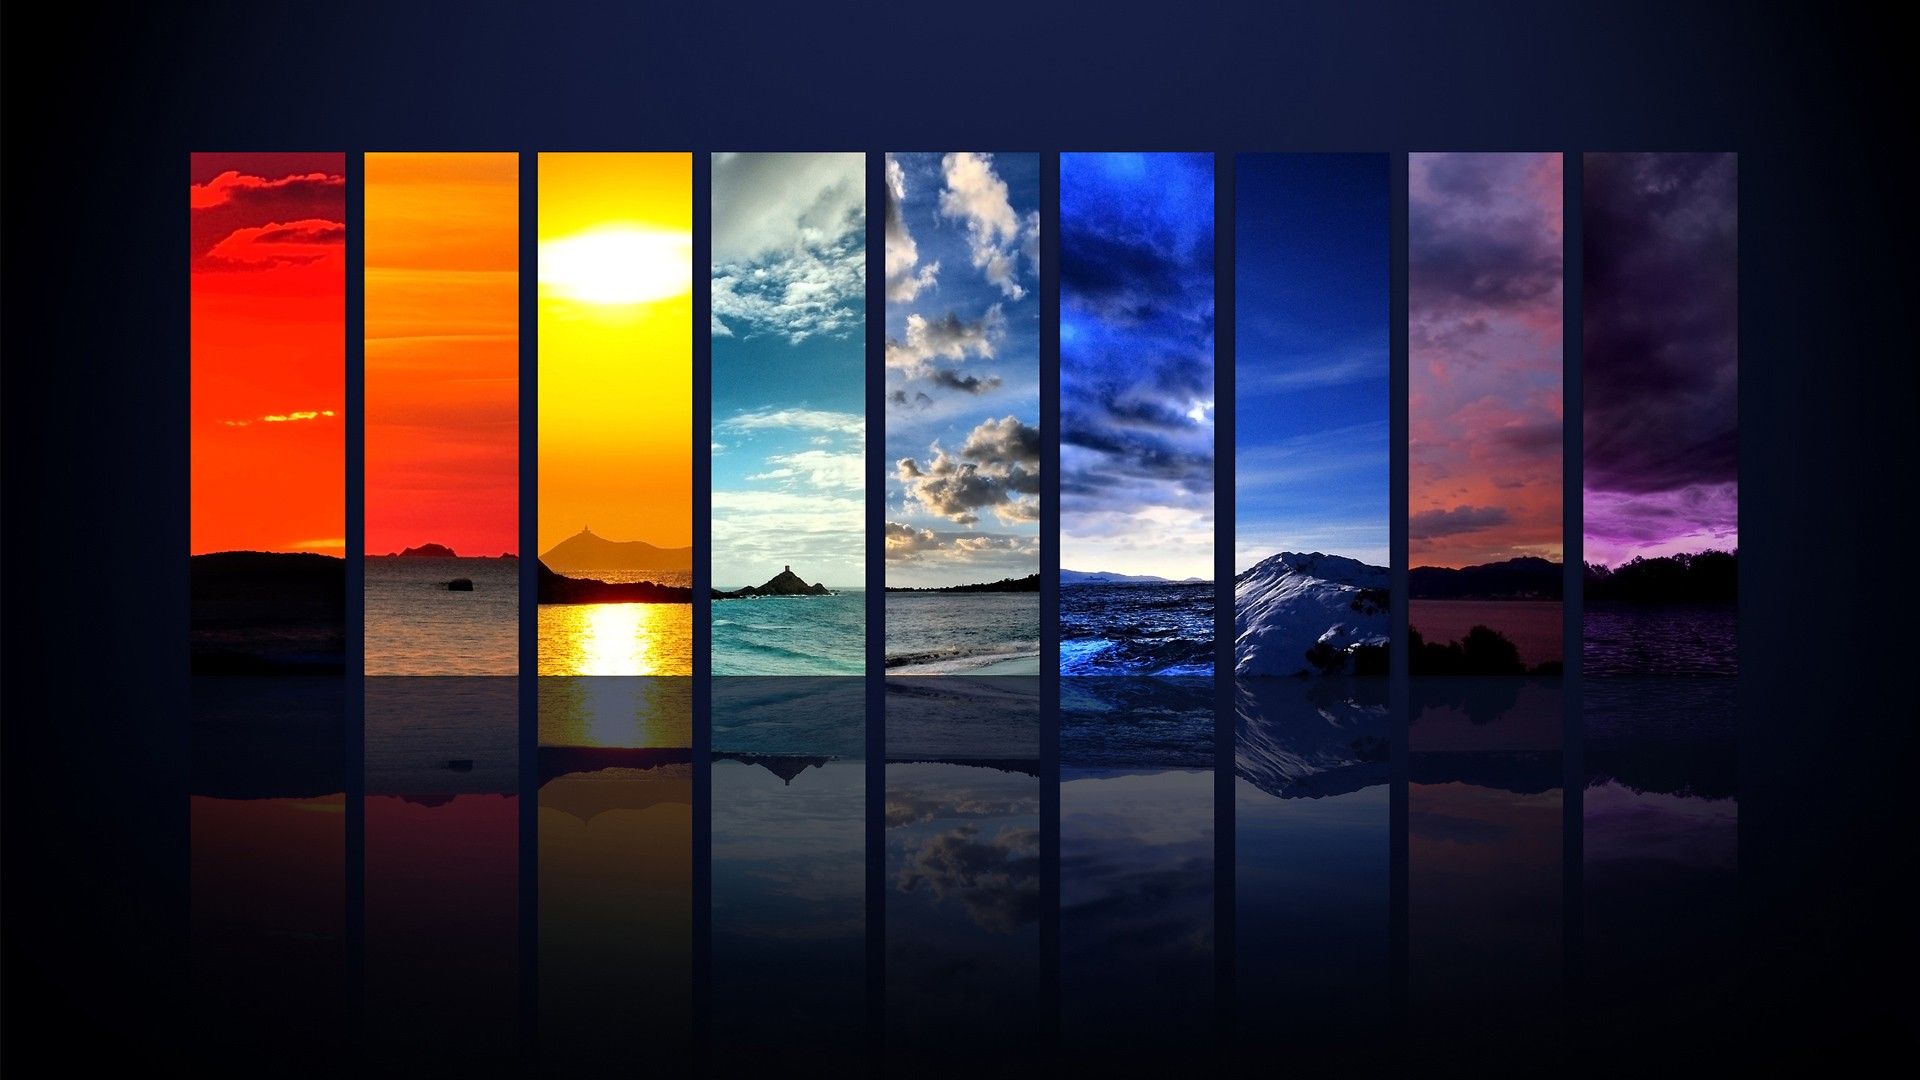 Cool Desktop Backgrounds HD Wallpaper: Want to make your desktop stand out from the rest? Look no further than these \